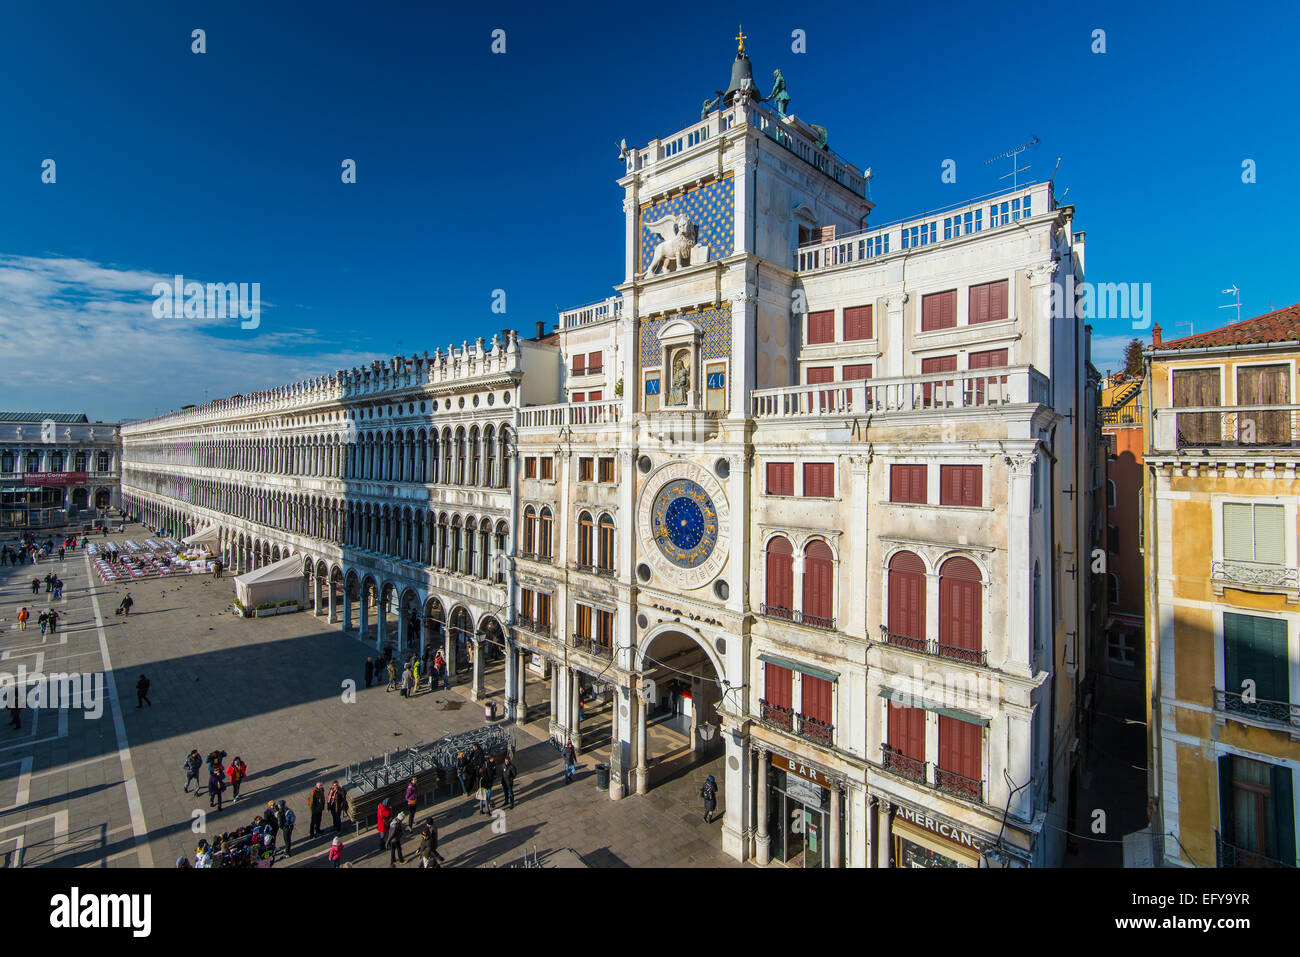 Top view of St. Mark’s Square with the Clock Tower, Venice, Veneto, Italy Stock Photo